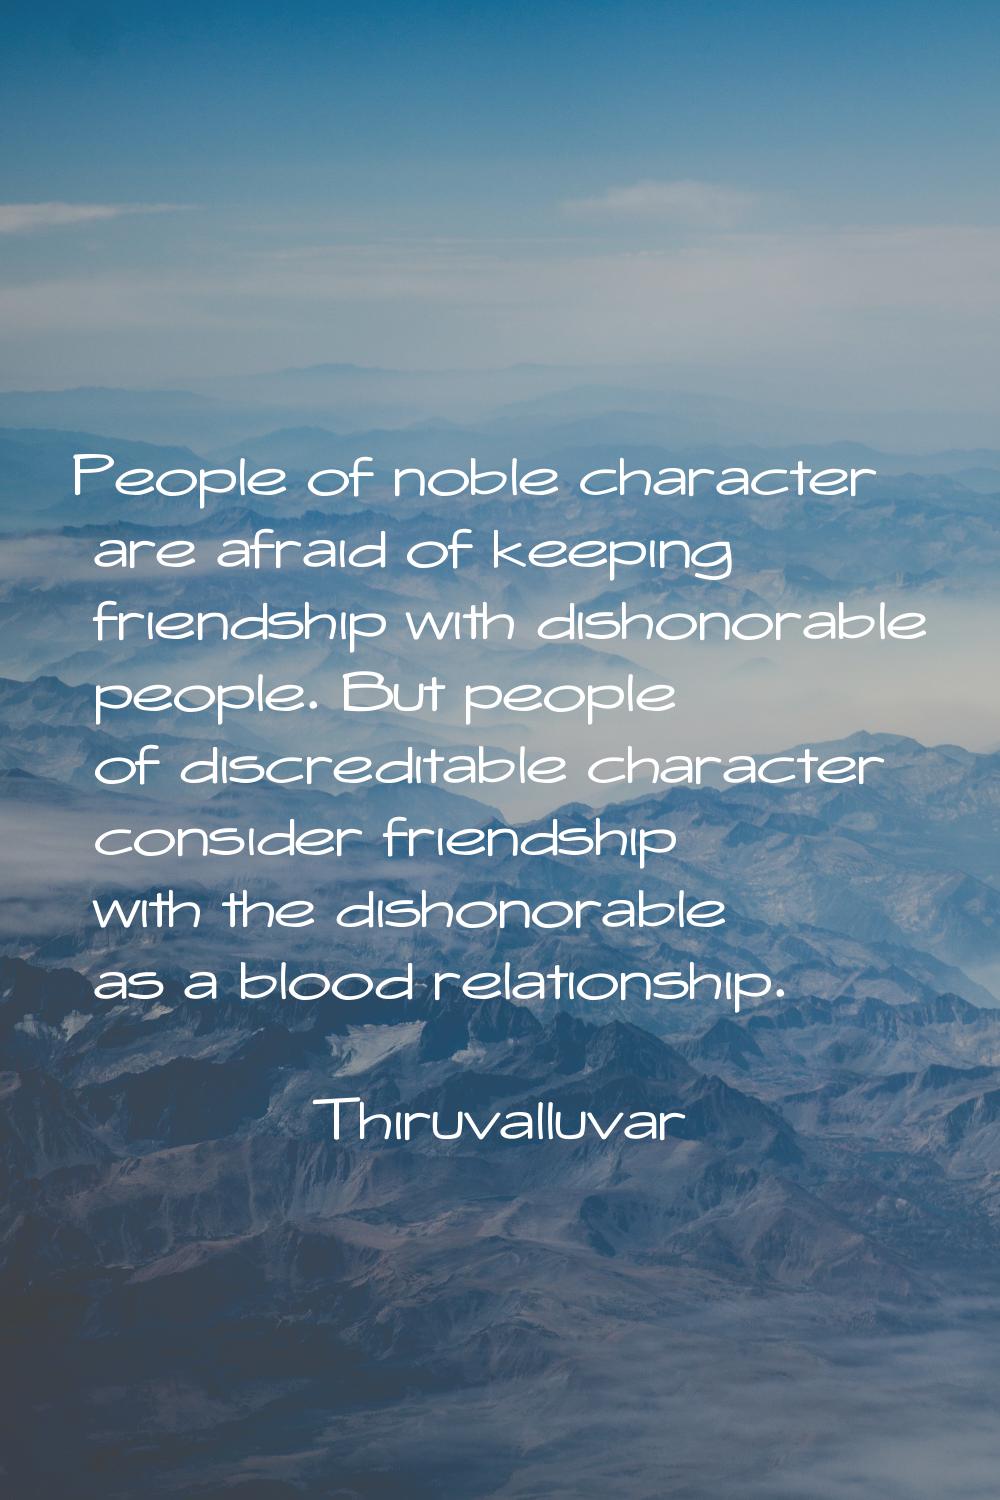 People of noble character are afraid of keeping friendship with dishonorable people. But people of 